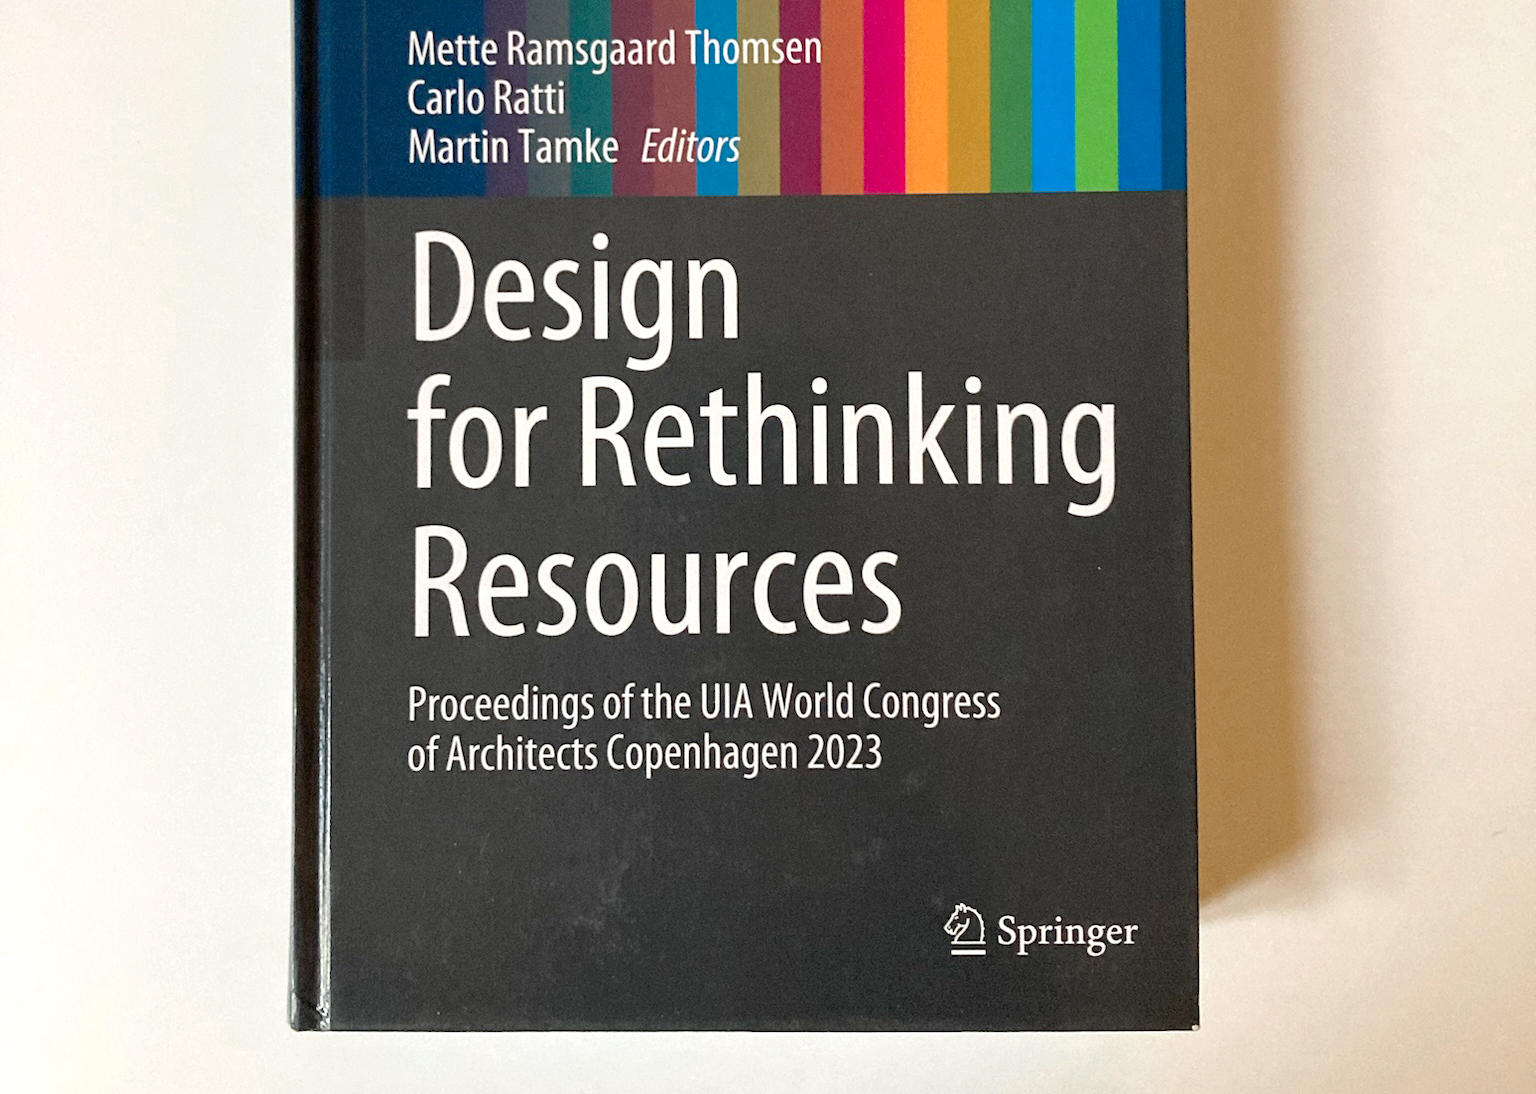 DESIGN FOR RETHINKING RESOURCES